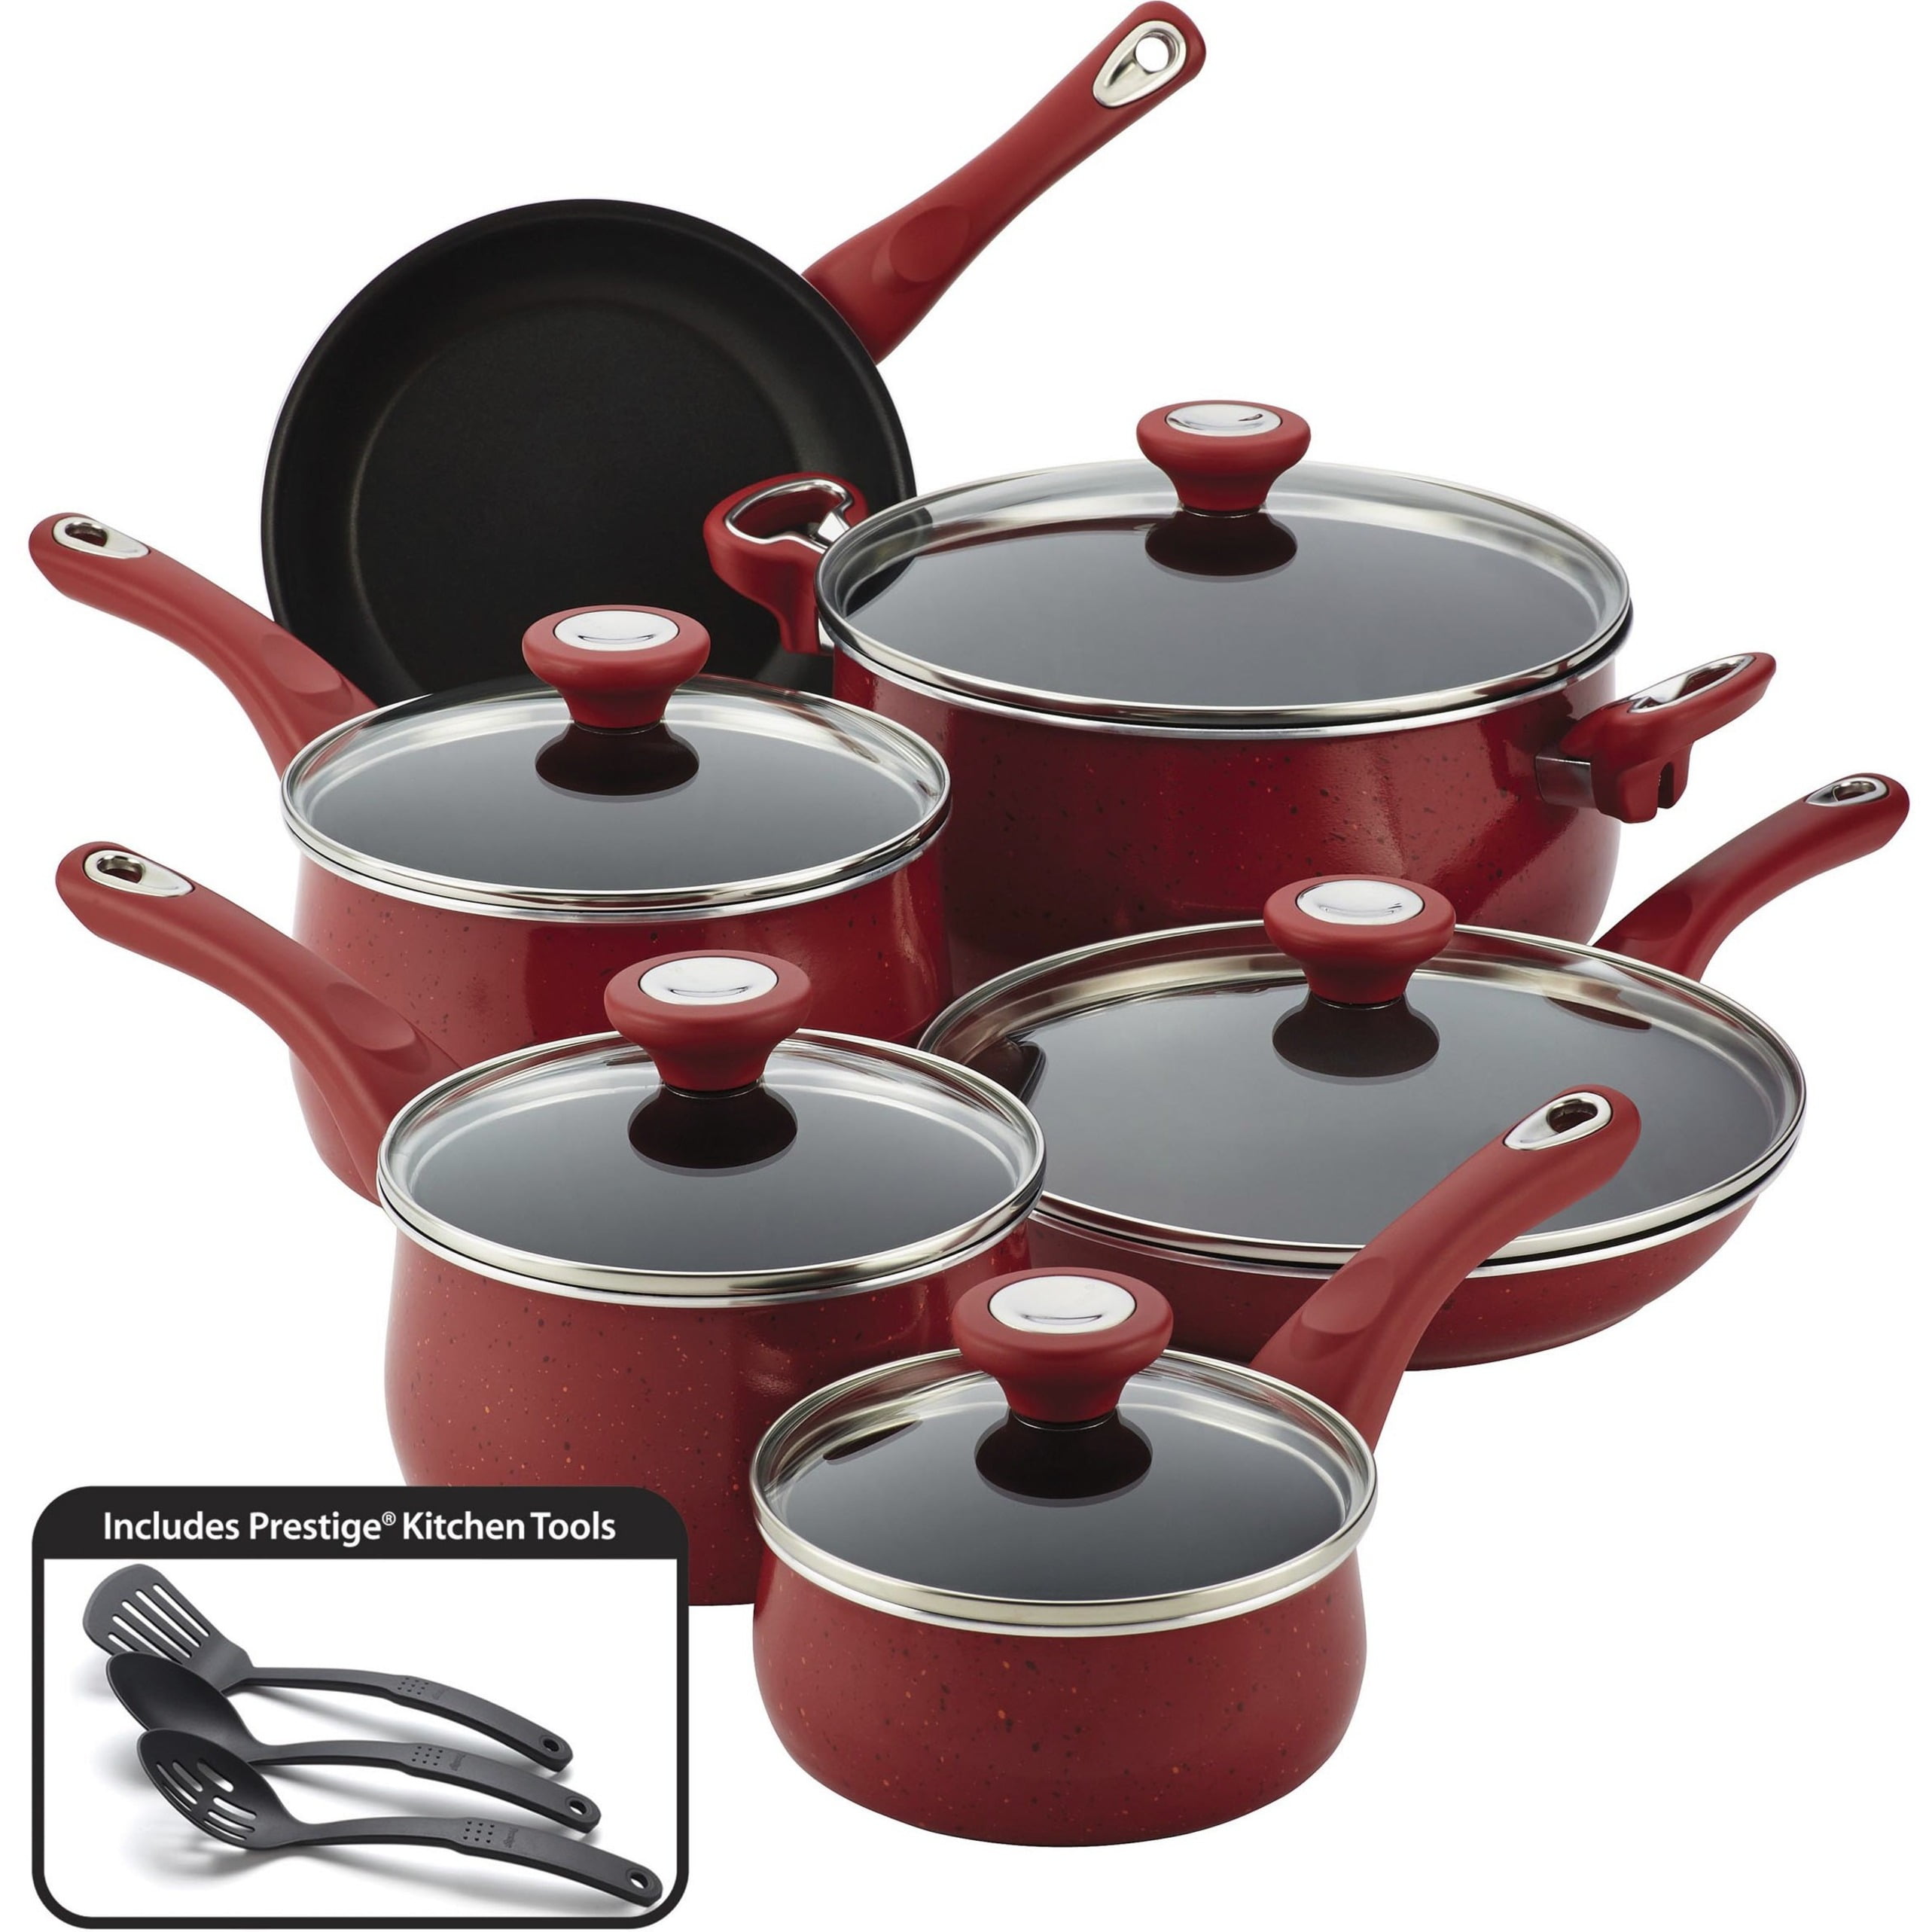 Buy Wholesale China Eap New Design Red Color Granite Coating Cookware  Metalic Coating Induction Cookware & Nonstick Cookware Set at USD 6